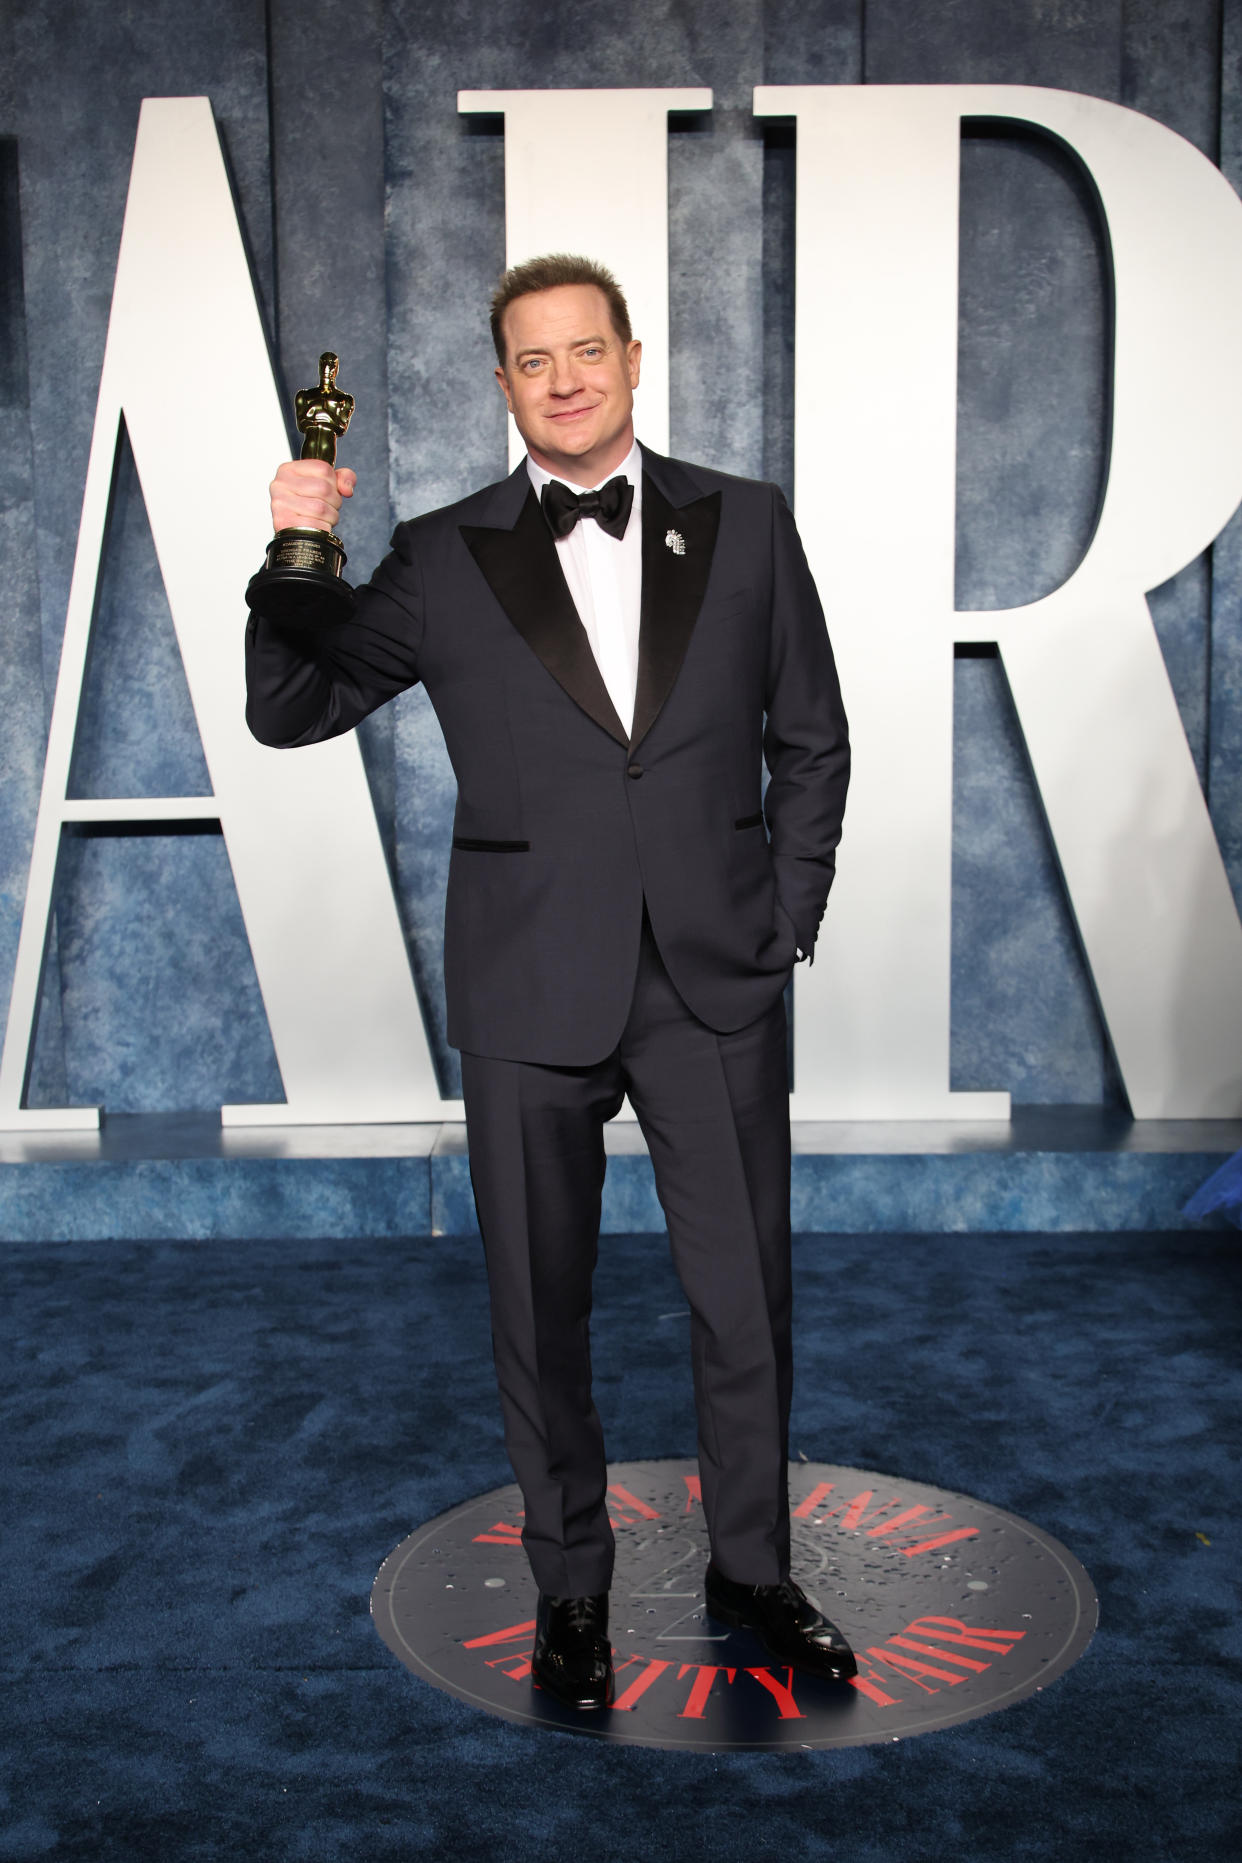 BEVERLY HILLS, CALIFORNIA - MARCH 12: Brendan Fraser, winner of the Oscar for Best Actor attend the 2023 Vanity Fair Oscar Party hosted by Radhika Jones at Wallis Annenberg Center for the Performing Arts on March 12, 2023 in Beverly Hills, California. (Photo by Daniele Venturelli/Getty Images)